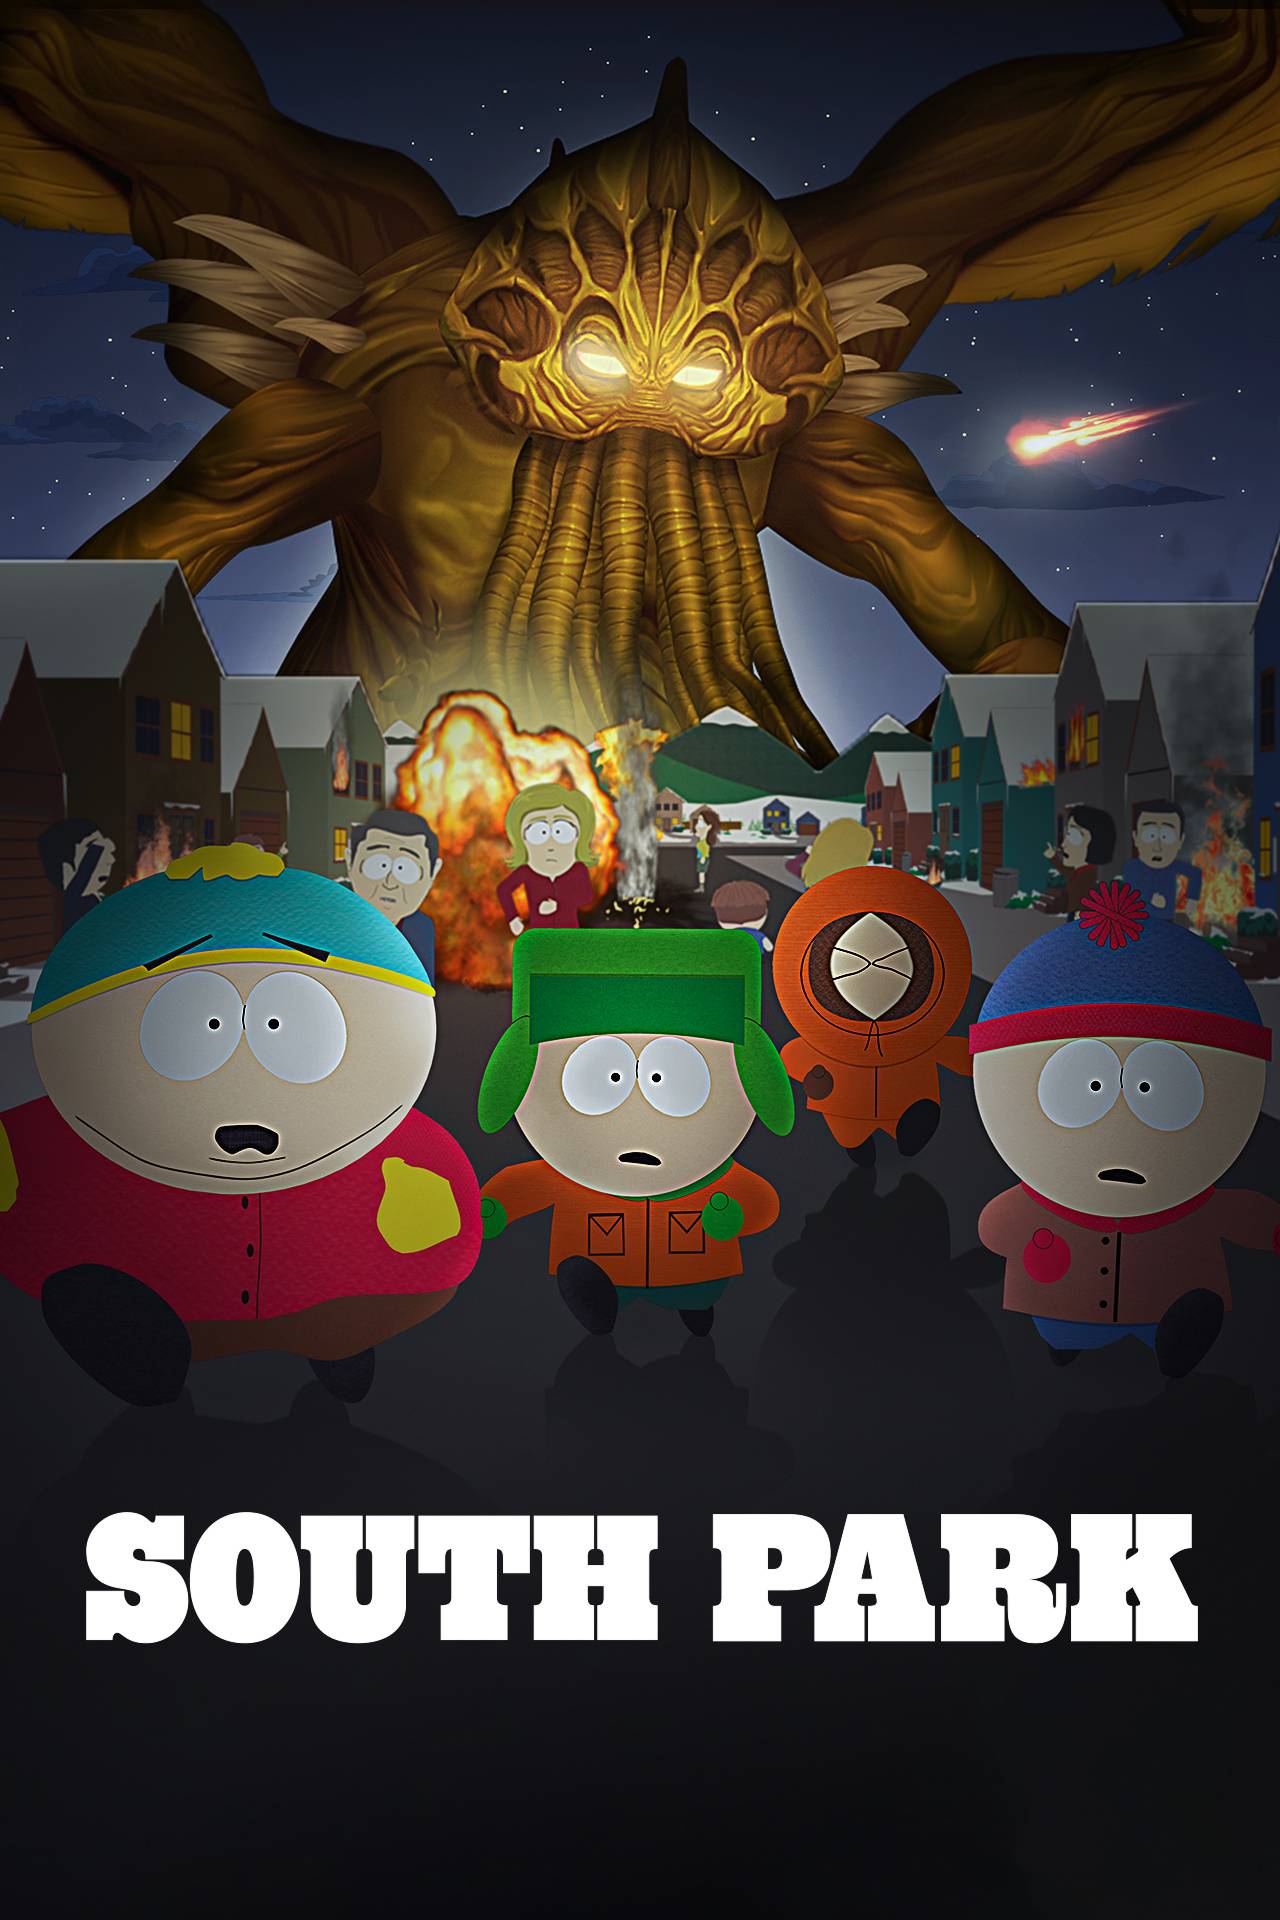 South Park - Series | Comedy Central US